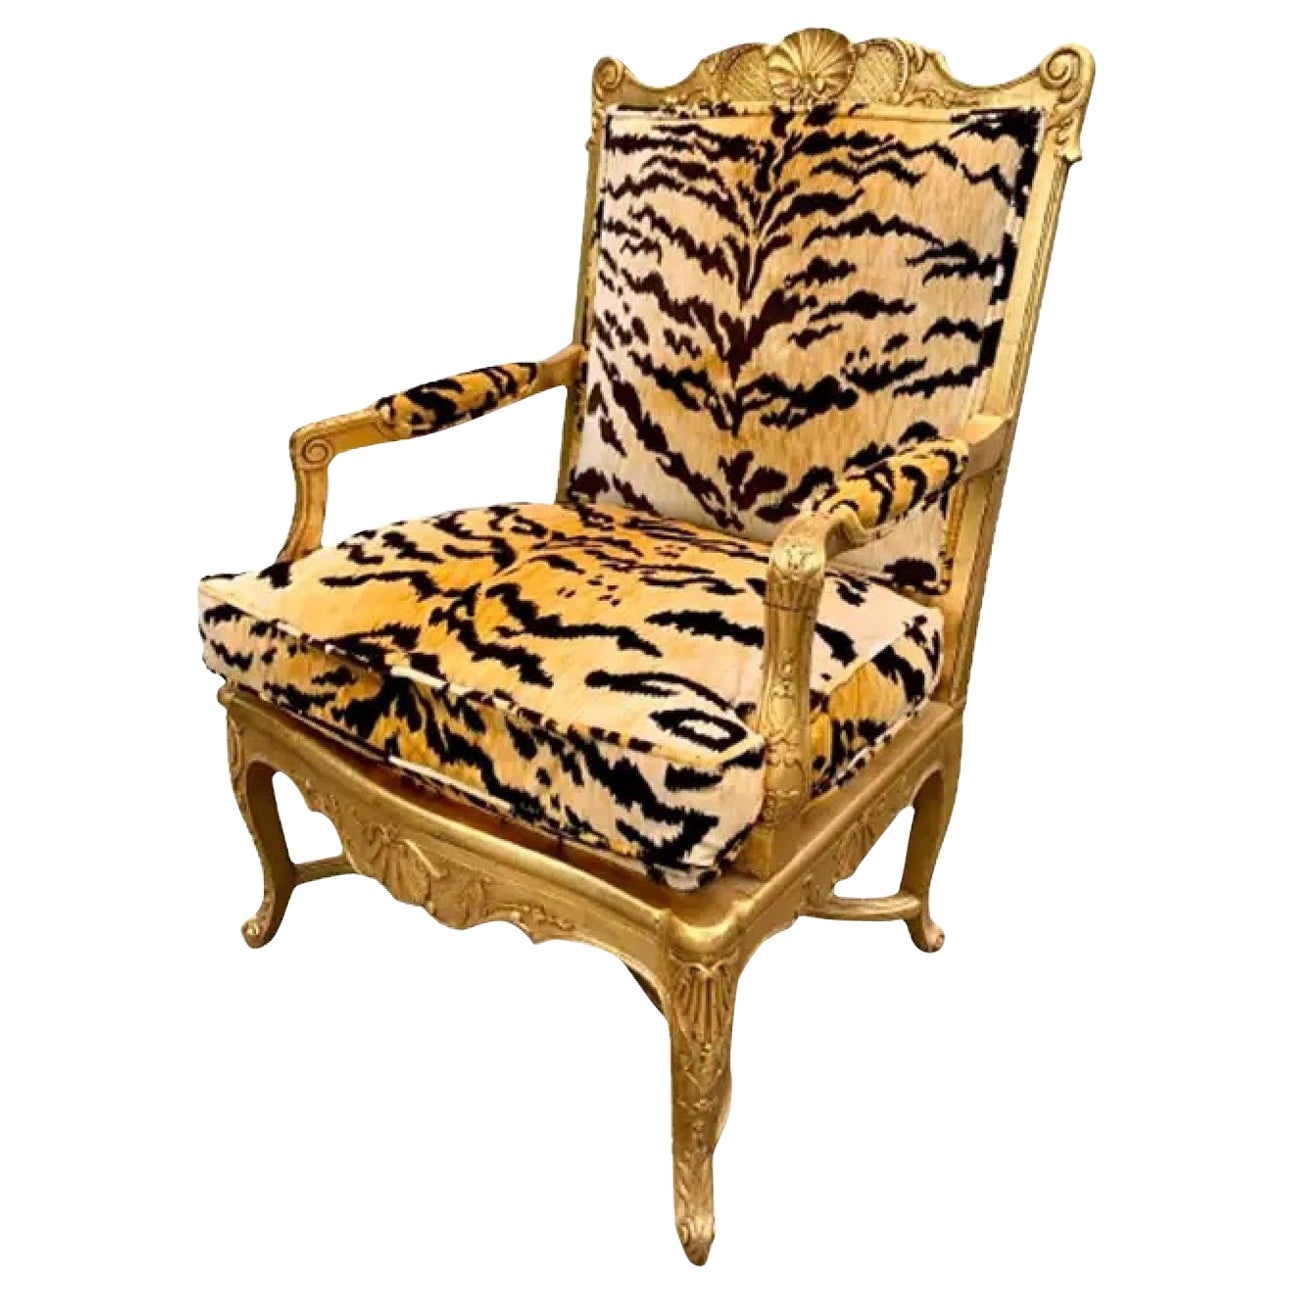 French Regency Giltwood Fauteuil Lounge Chair in Scalamandré Le Tigre Tiger Silk For Sale